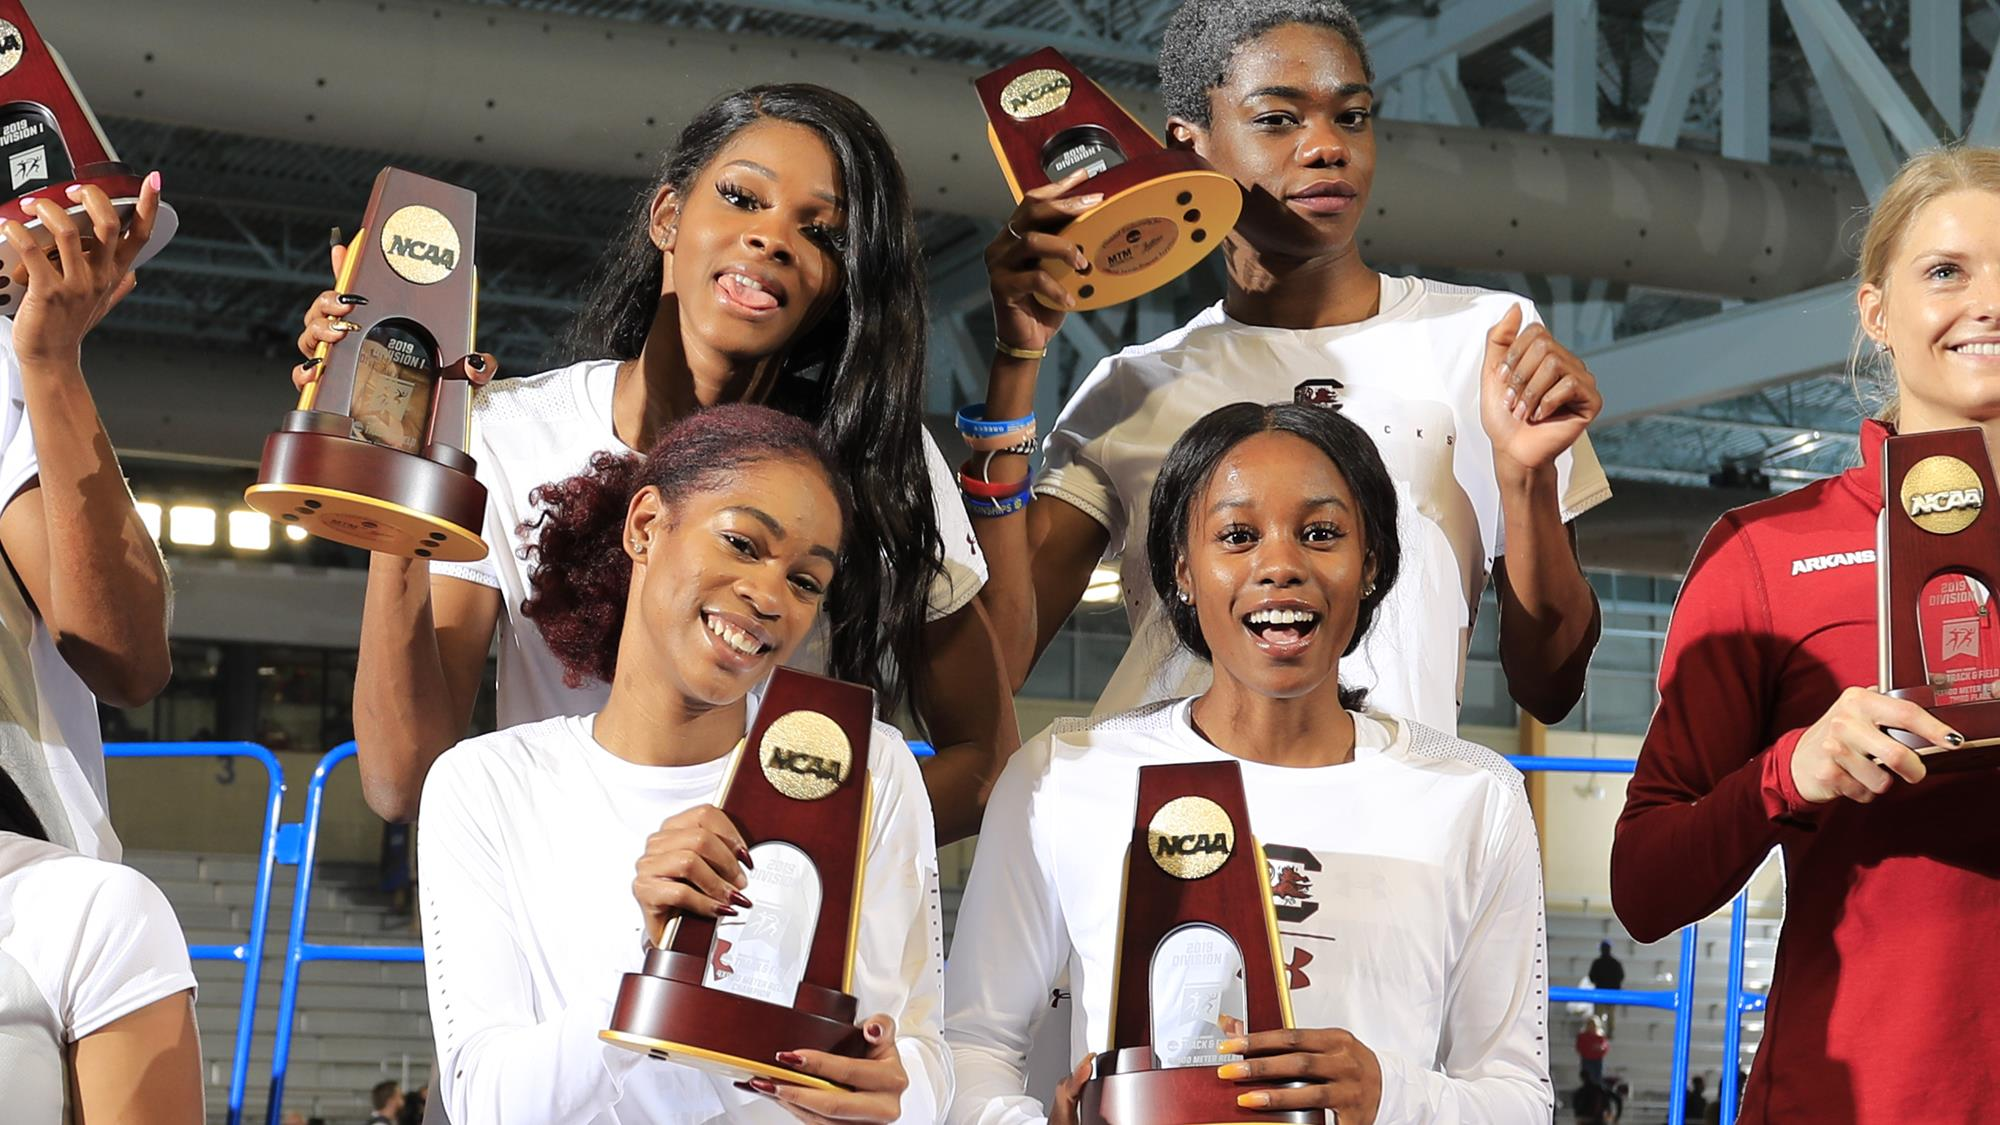 Gamecocks Win NCAA Women's 4x400m Championship to Close Indoor Nationals